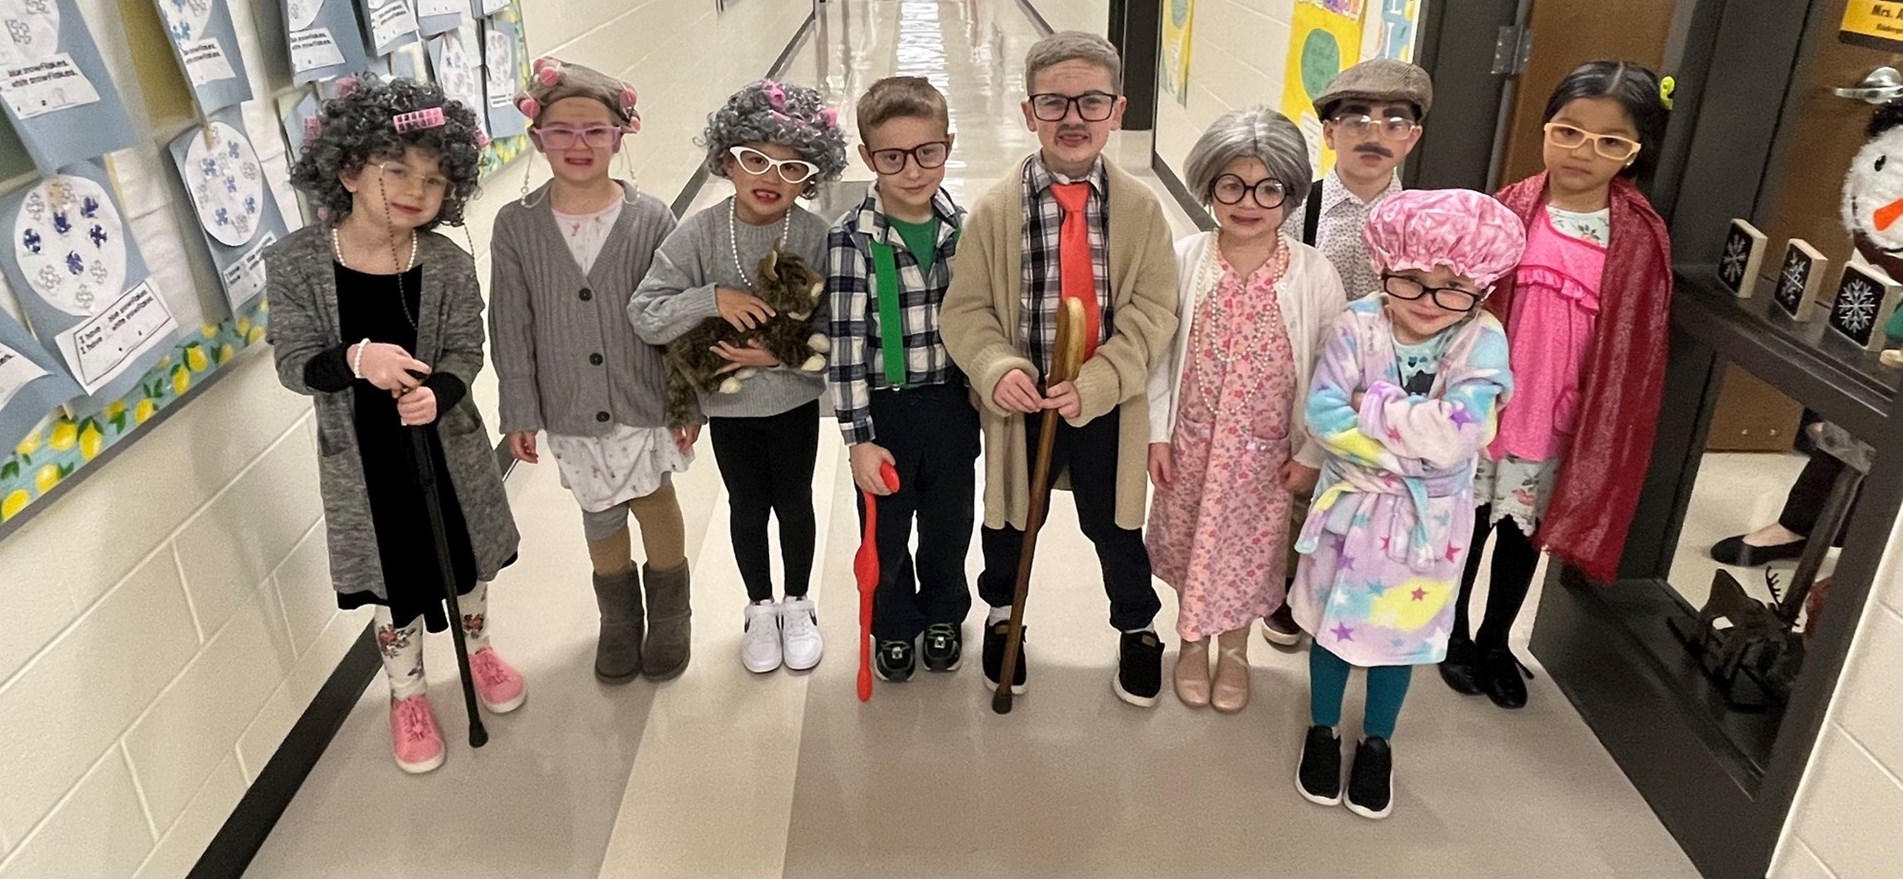 Elementary students standing in hallway, are costumed as senior citizens